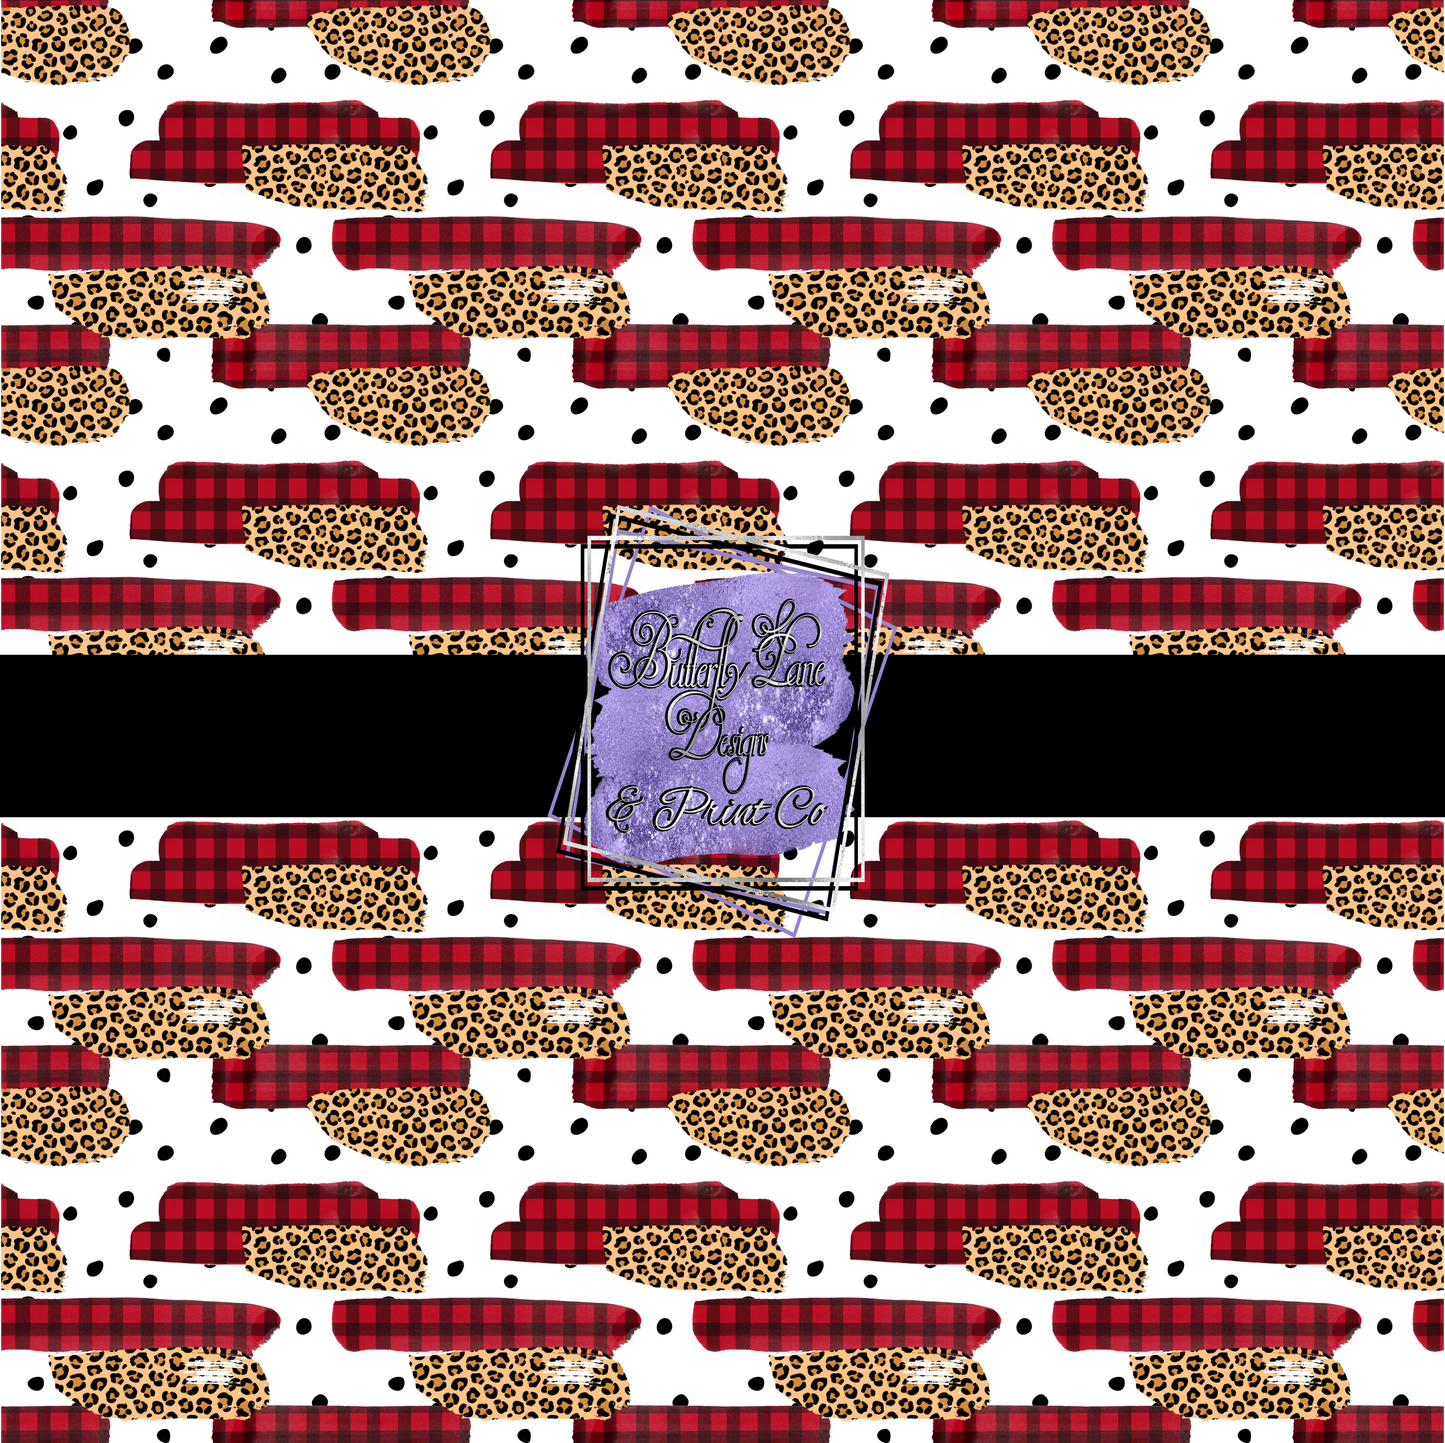 Red Plaid with leopard print PV 299 Patterned Vinyl